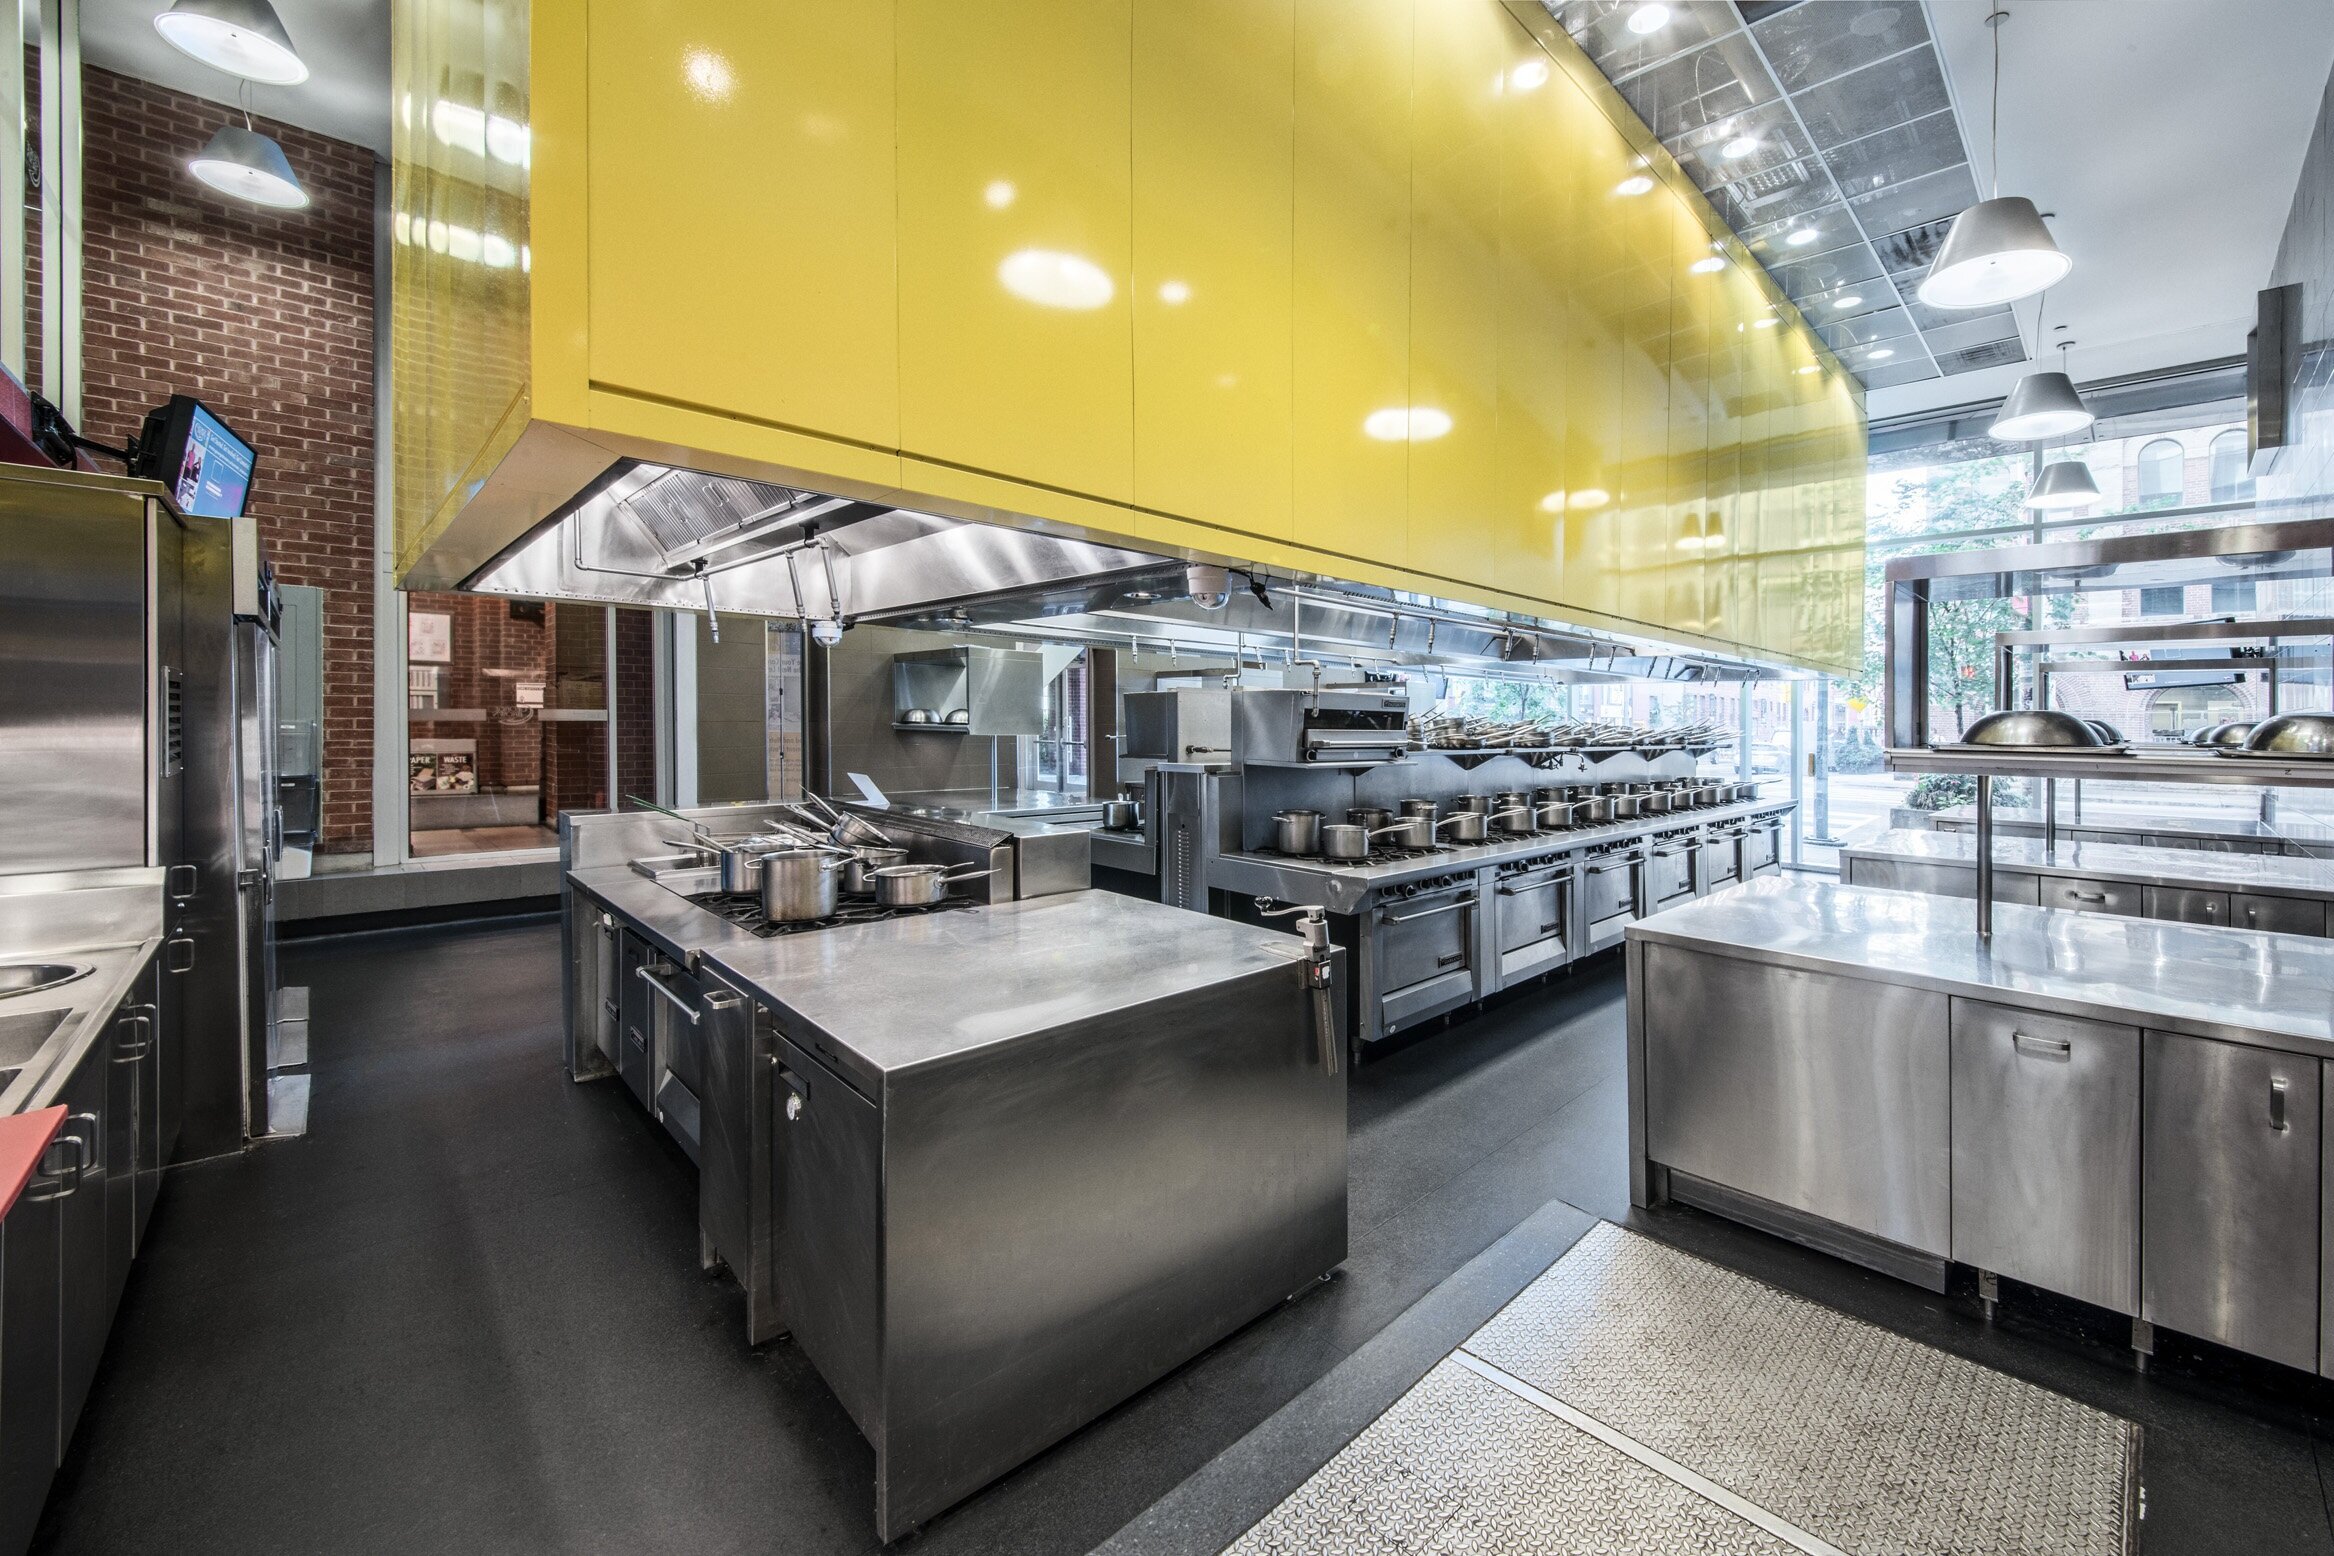 Second alternate view of a Culinary Kitchen Lab at the Centre for Hospitality &amp; Culinary Arts at George Brown College